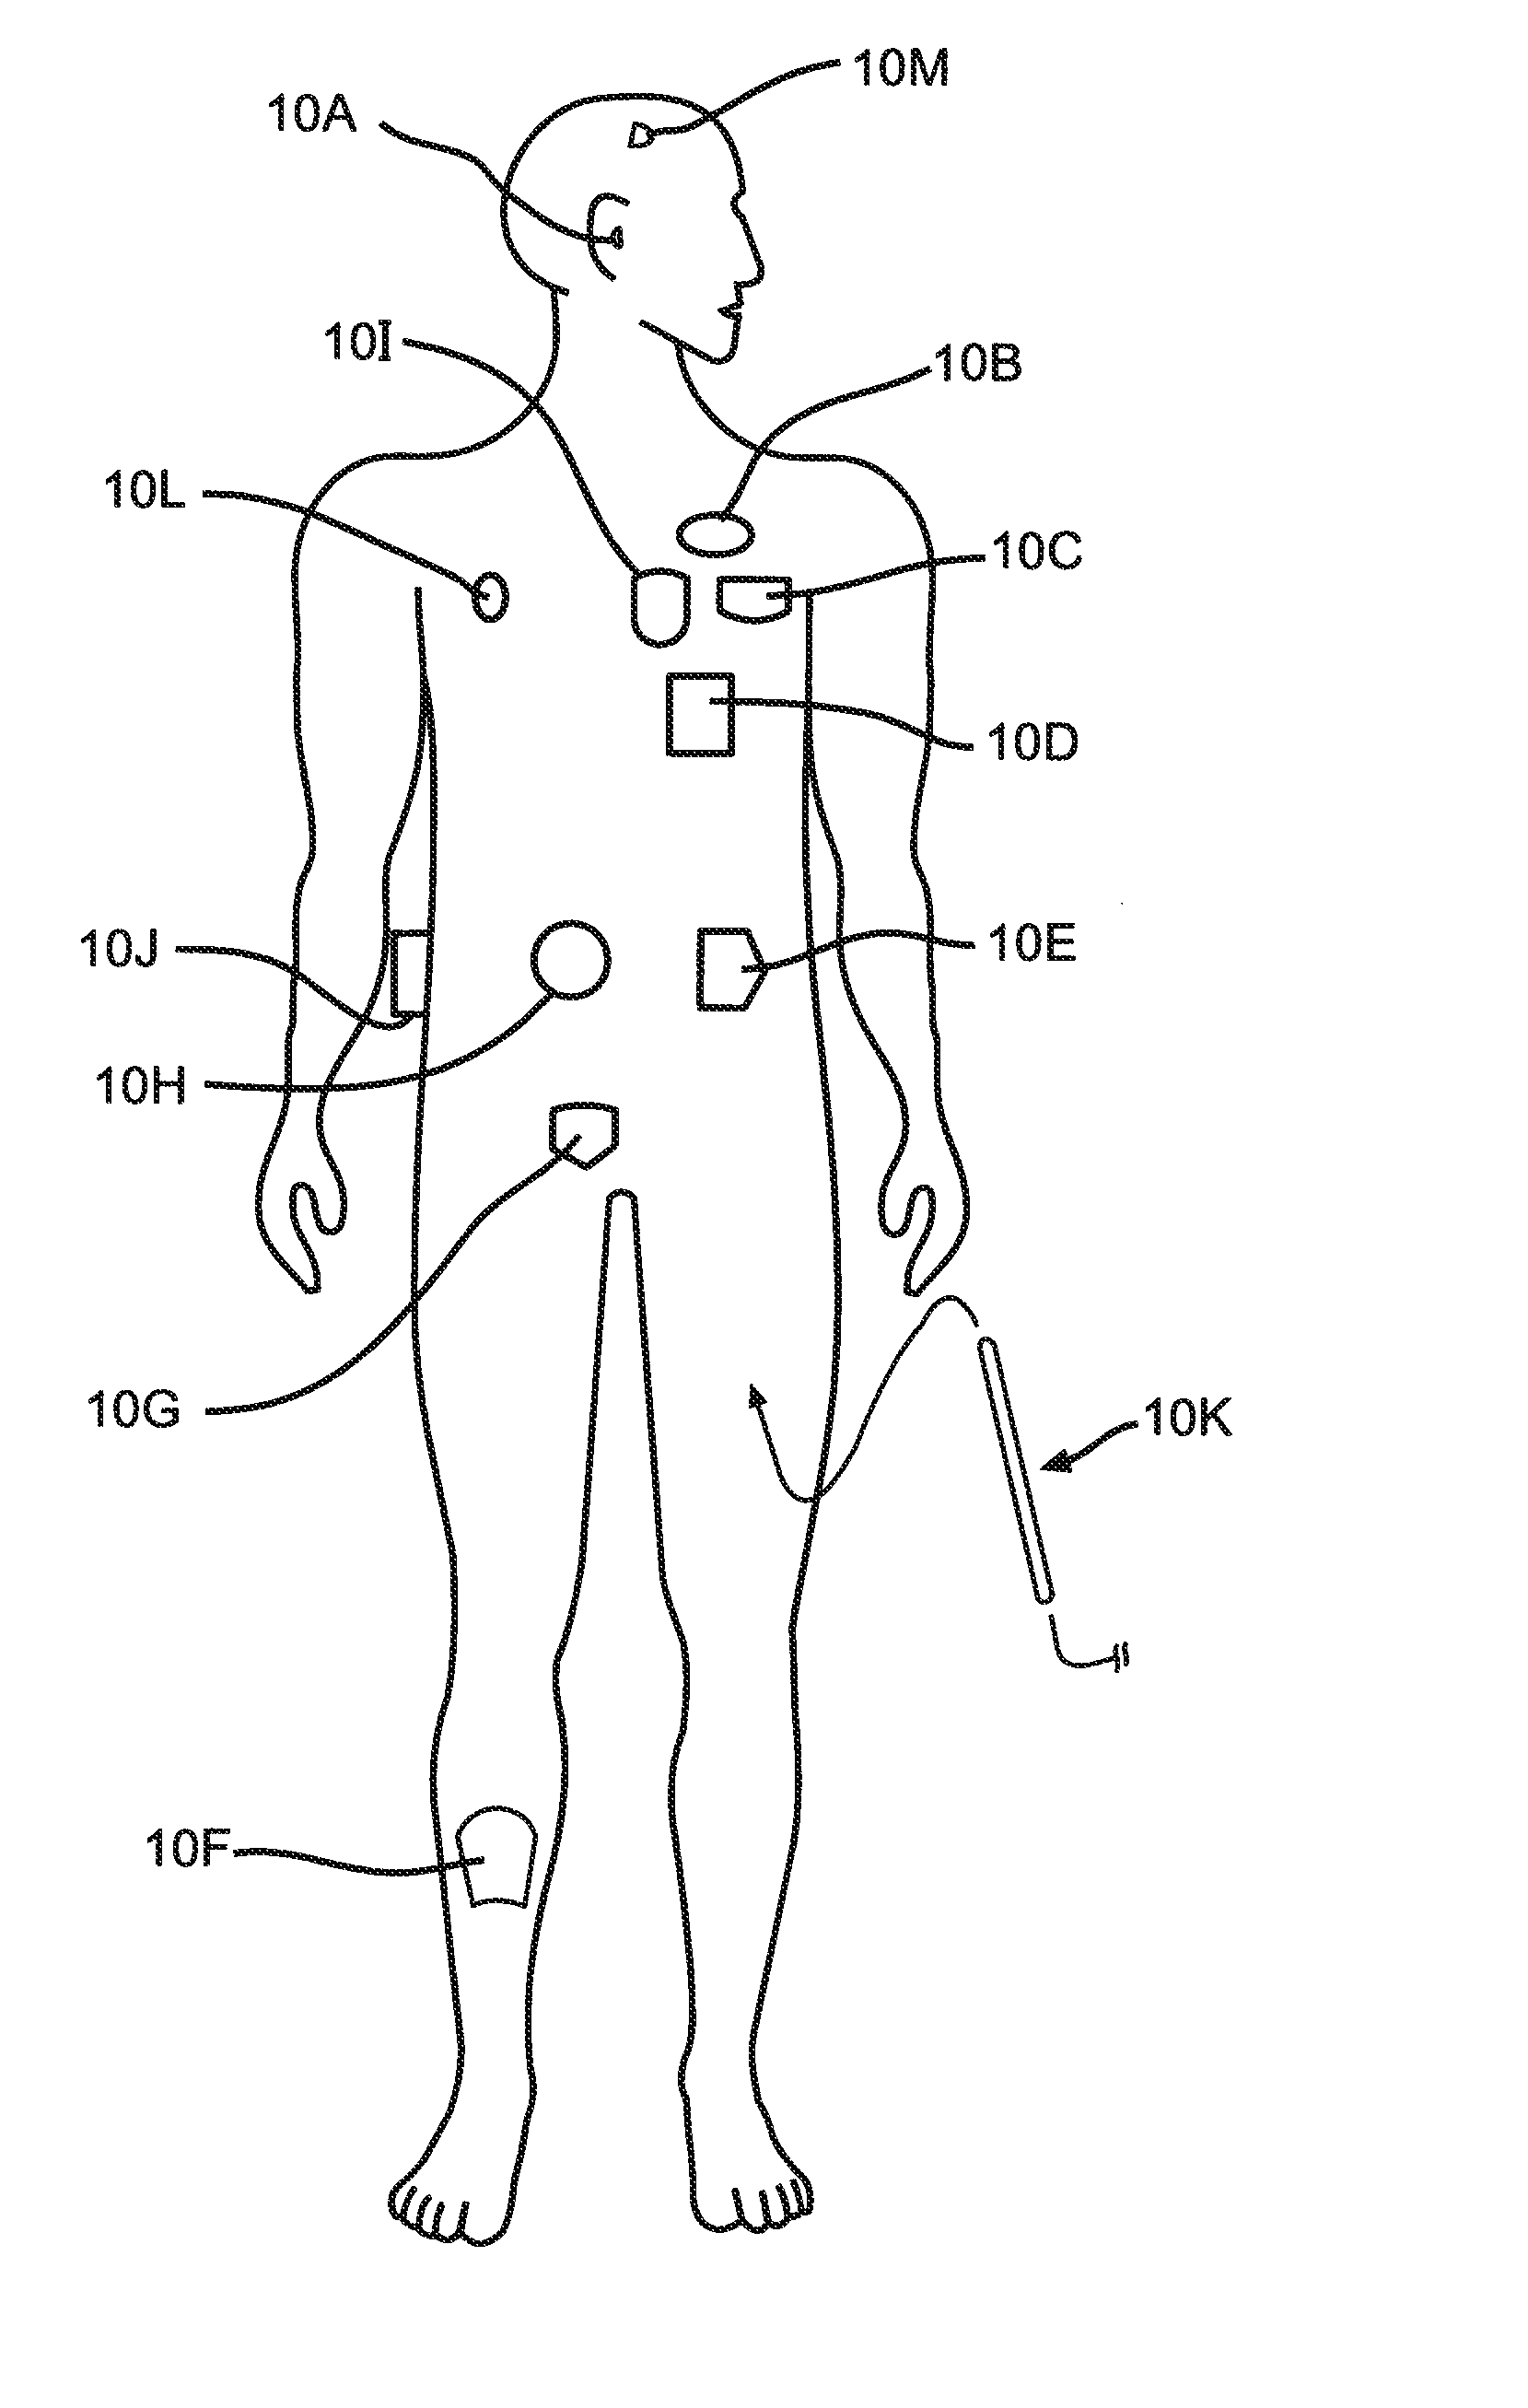 Positioning of a medical device conductor in an MRI environment to reduce RF induced current